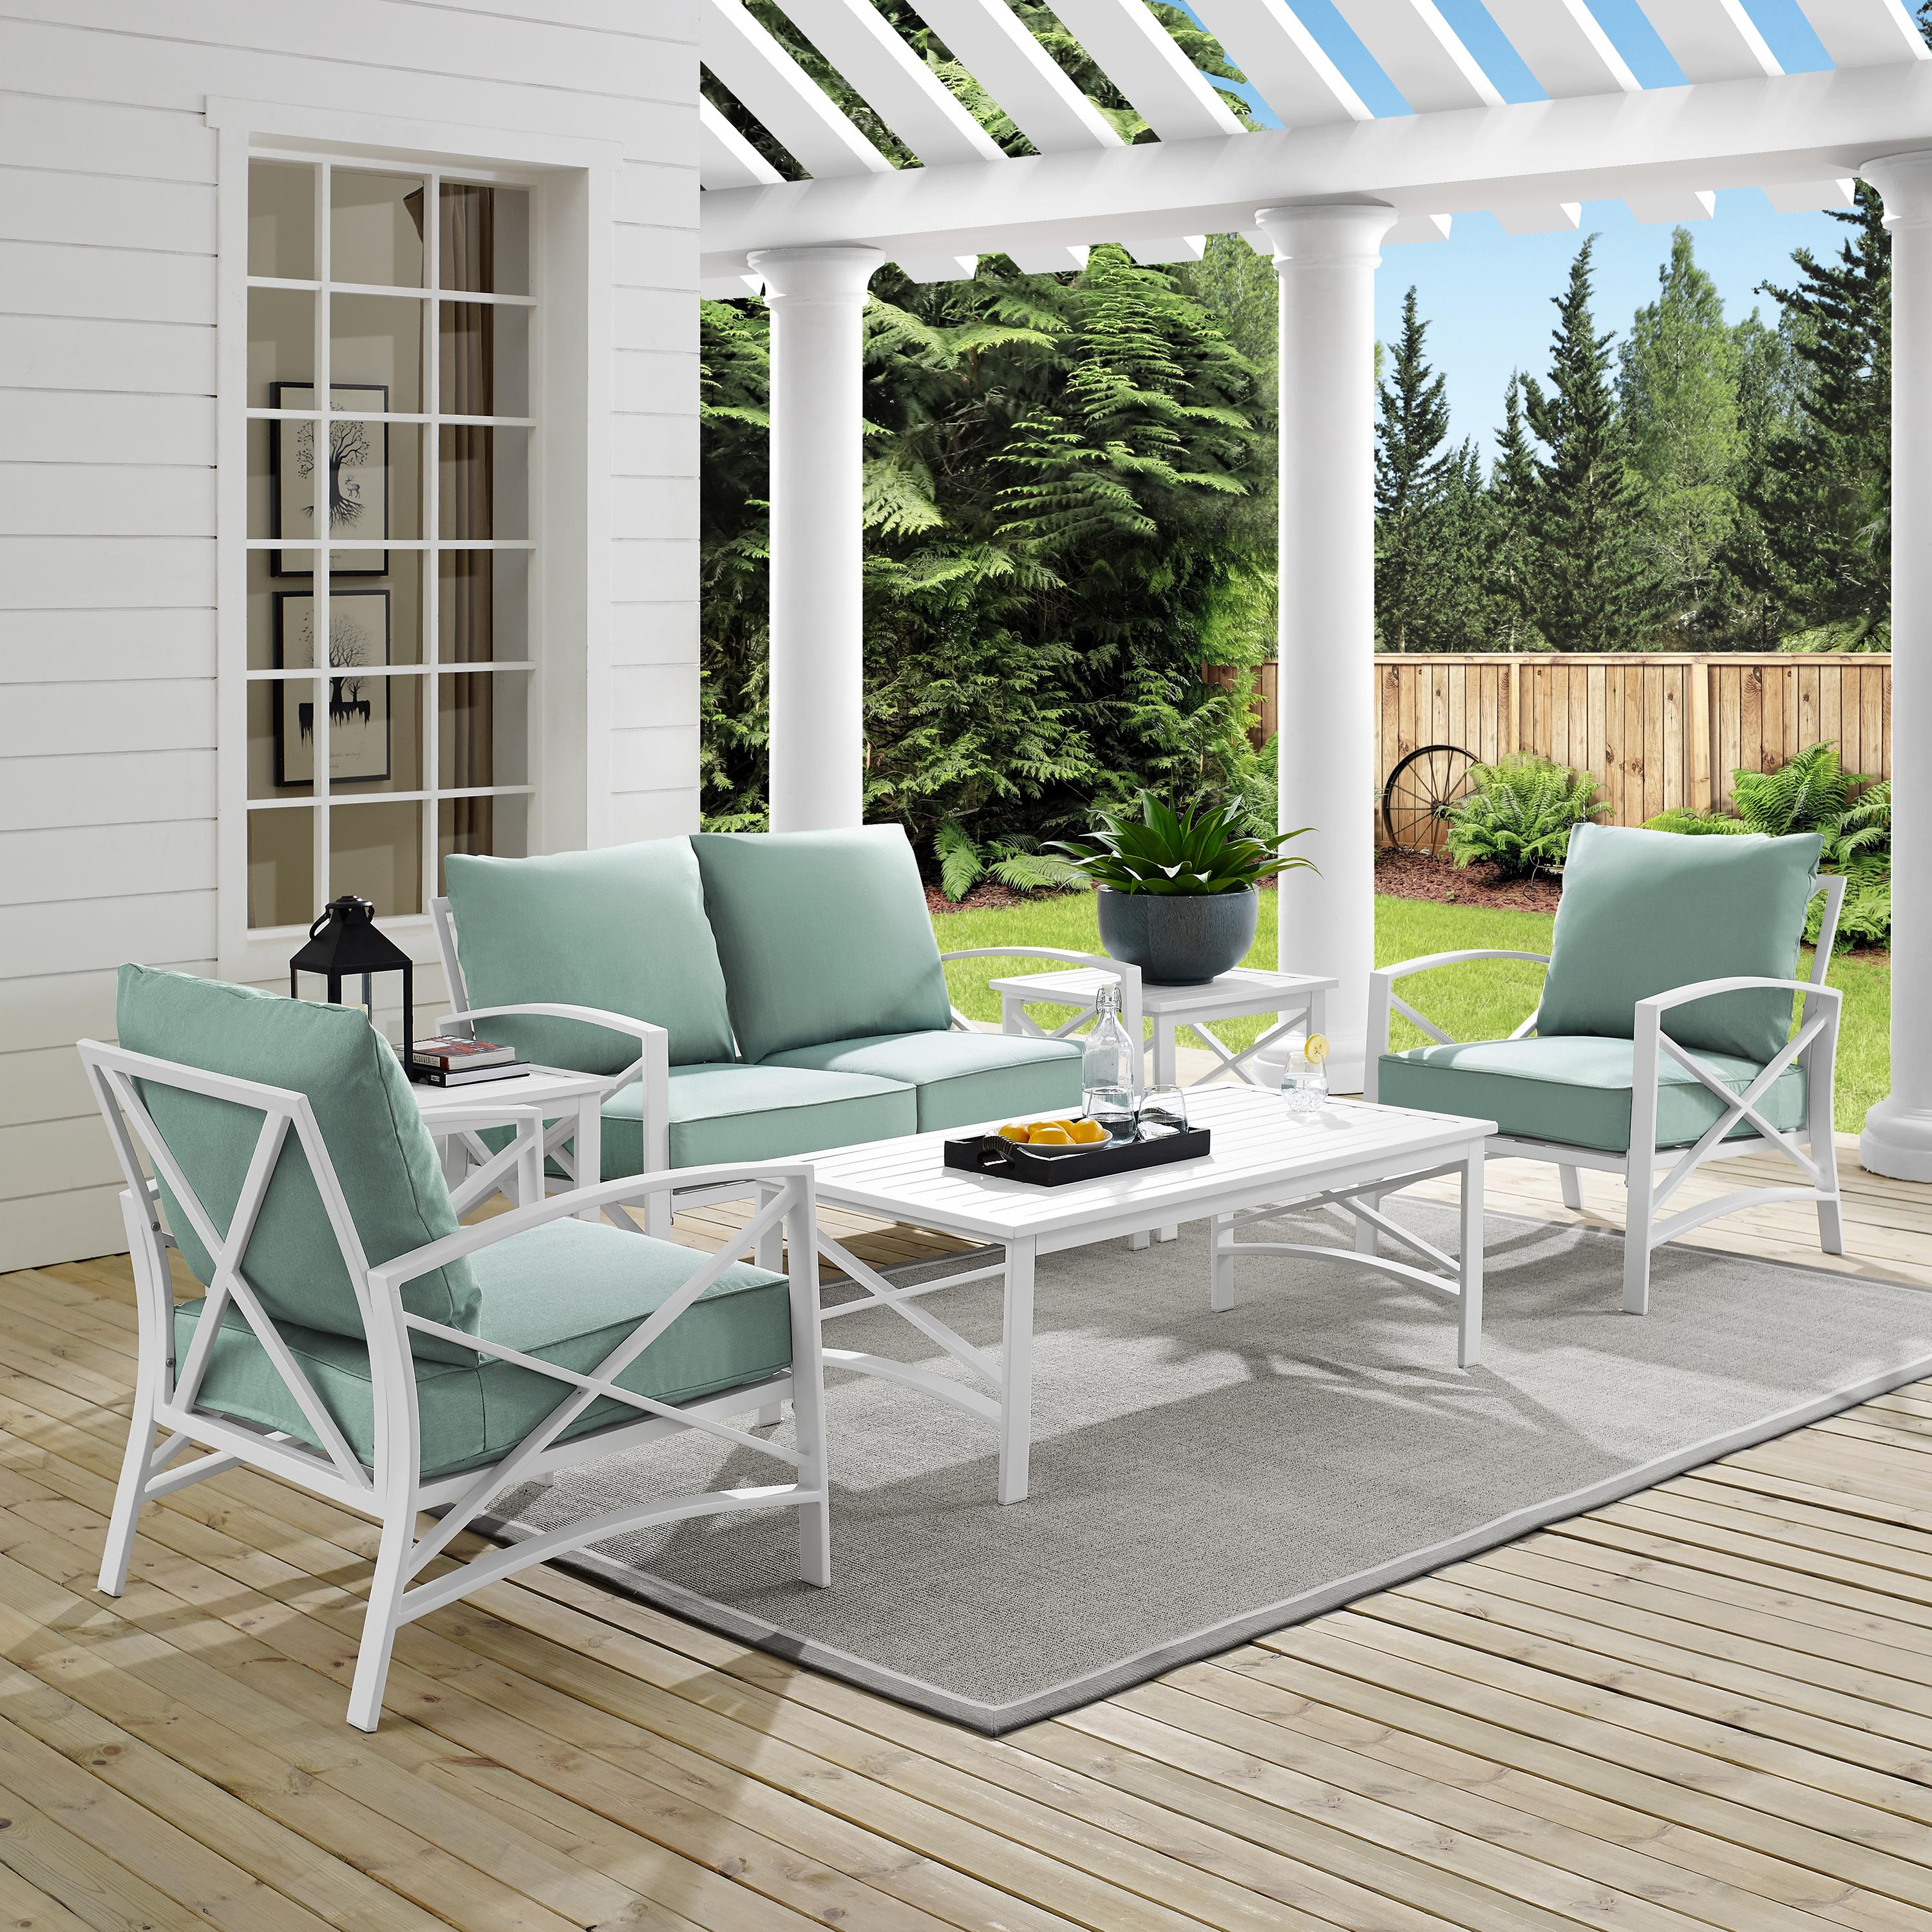 Crosley Kaplan 6Pc Outdoor Conversation Set- Loveseat, 2 Chairs, 2 Side Tables, Coffee Table - image 3 of 6